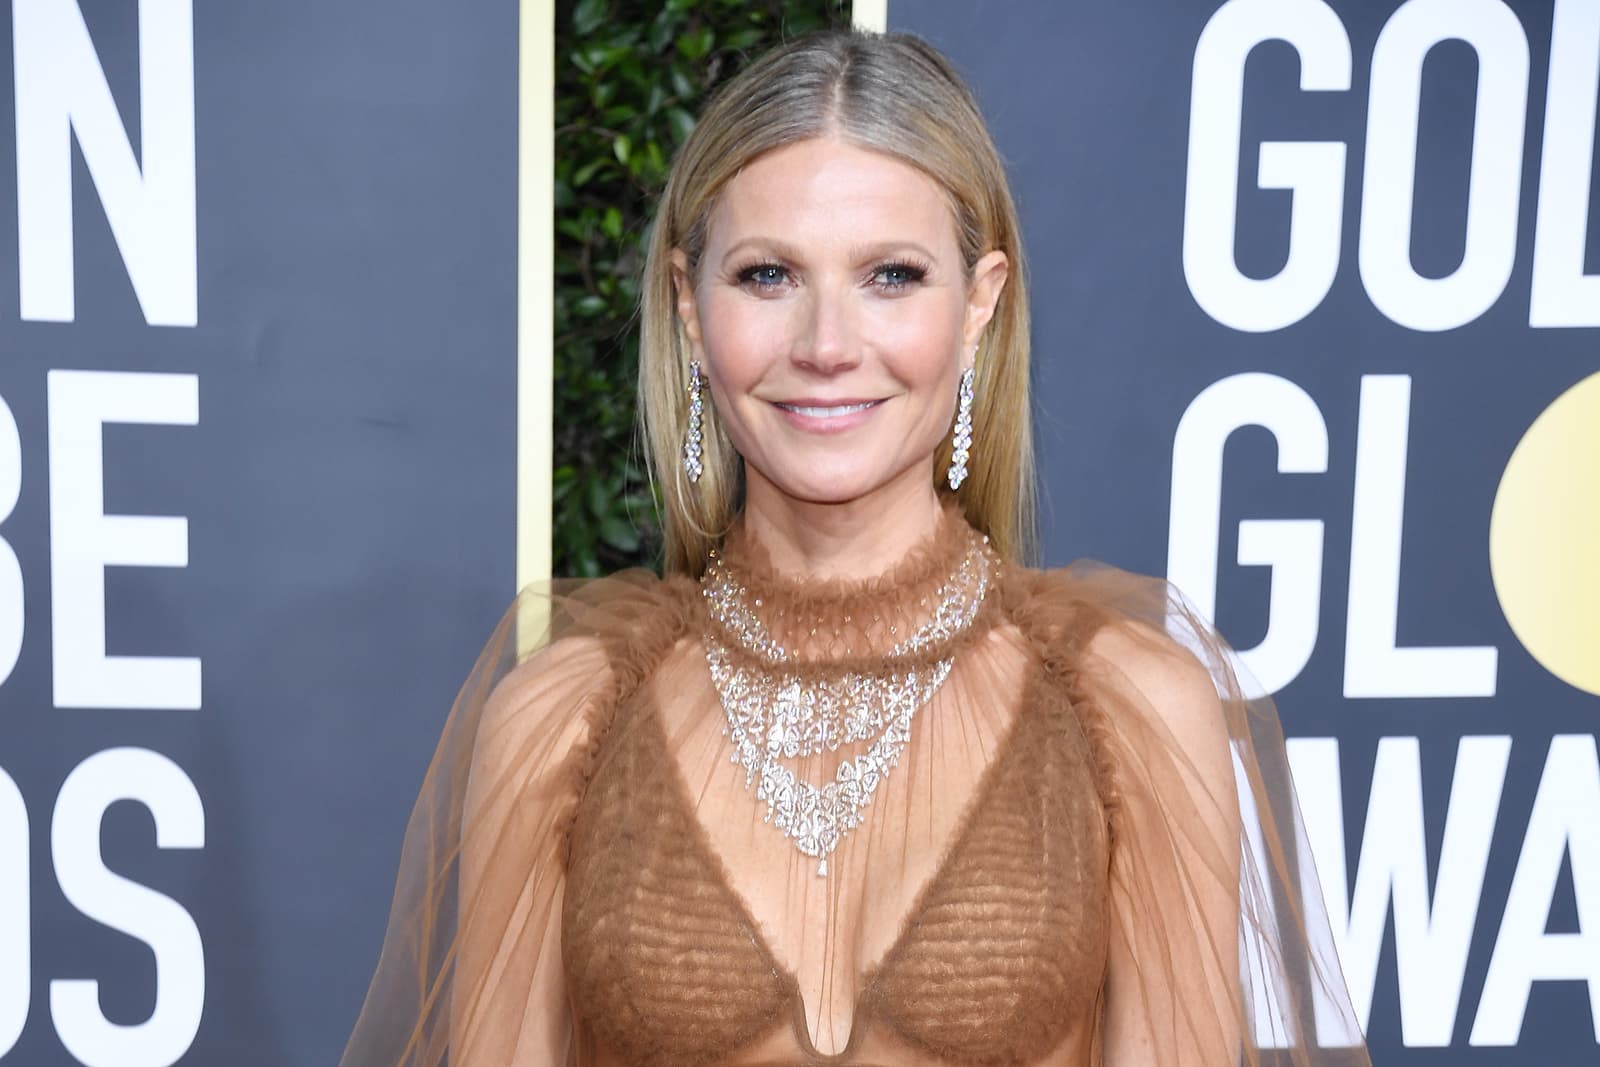 Gwyneth Paltrow wearing two Bulgari Fiorever collection necklaces, High Jewellery earrings and rings totaling almost 100ct of diamonds 